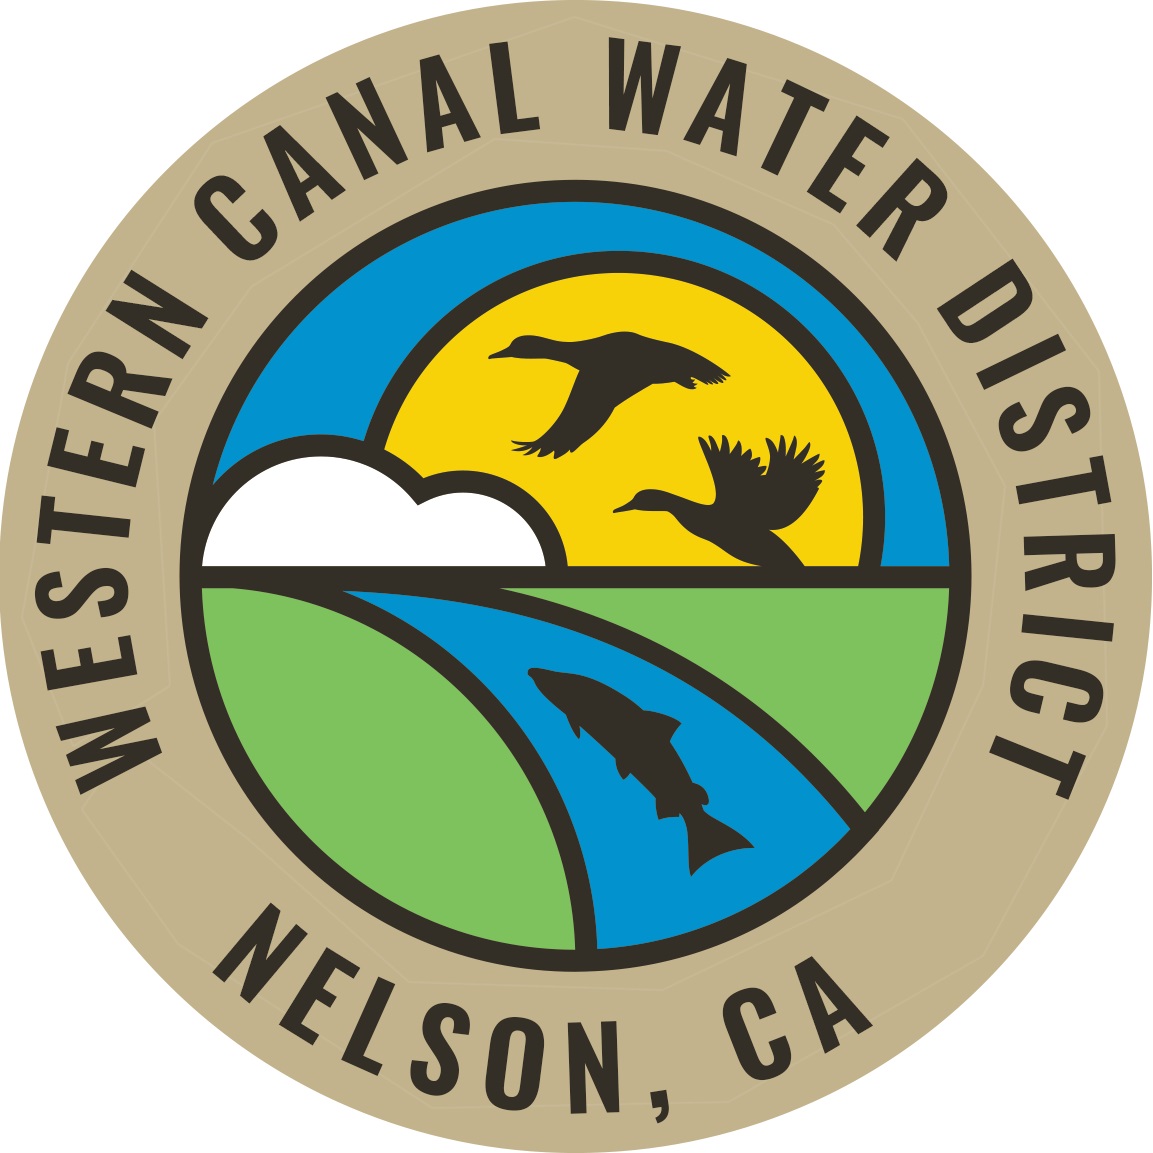 Western Canal Water District